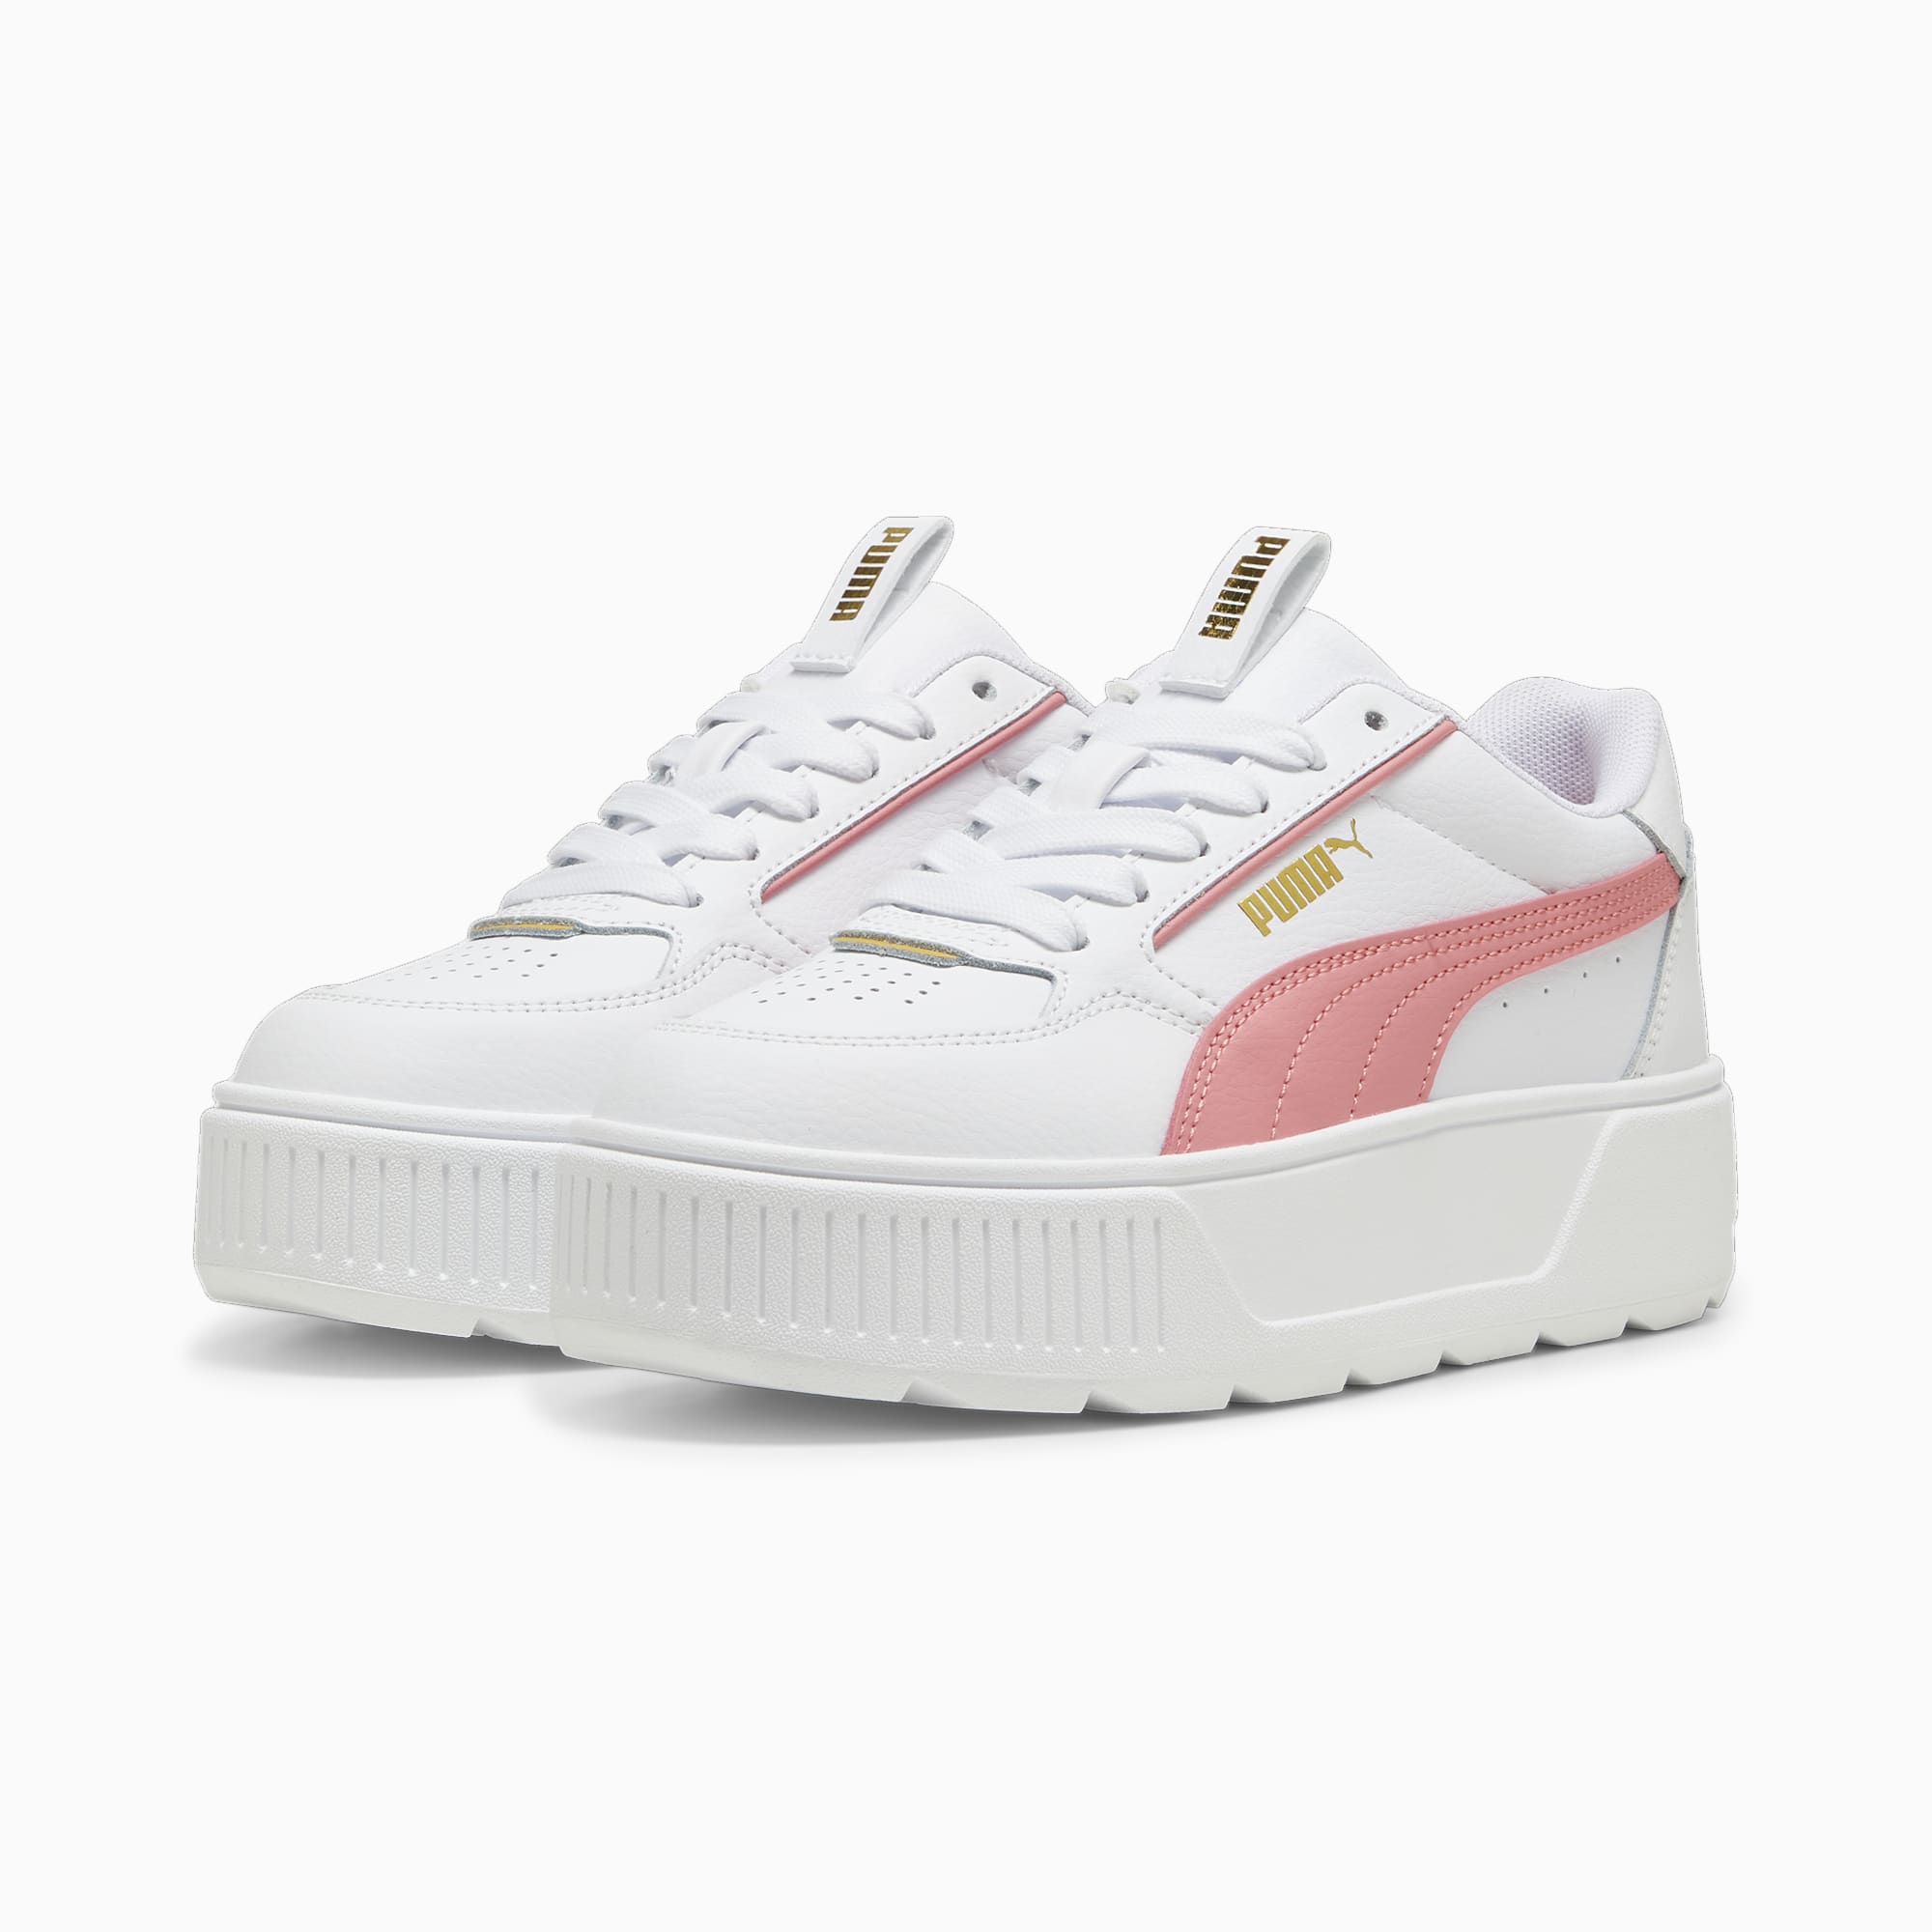 PUMA Karmen Rebelle Sneakers Youth, White/Passionfruit/Gold, Size 35,5, Shoes